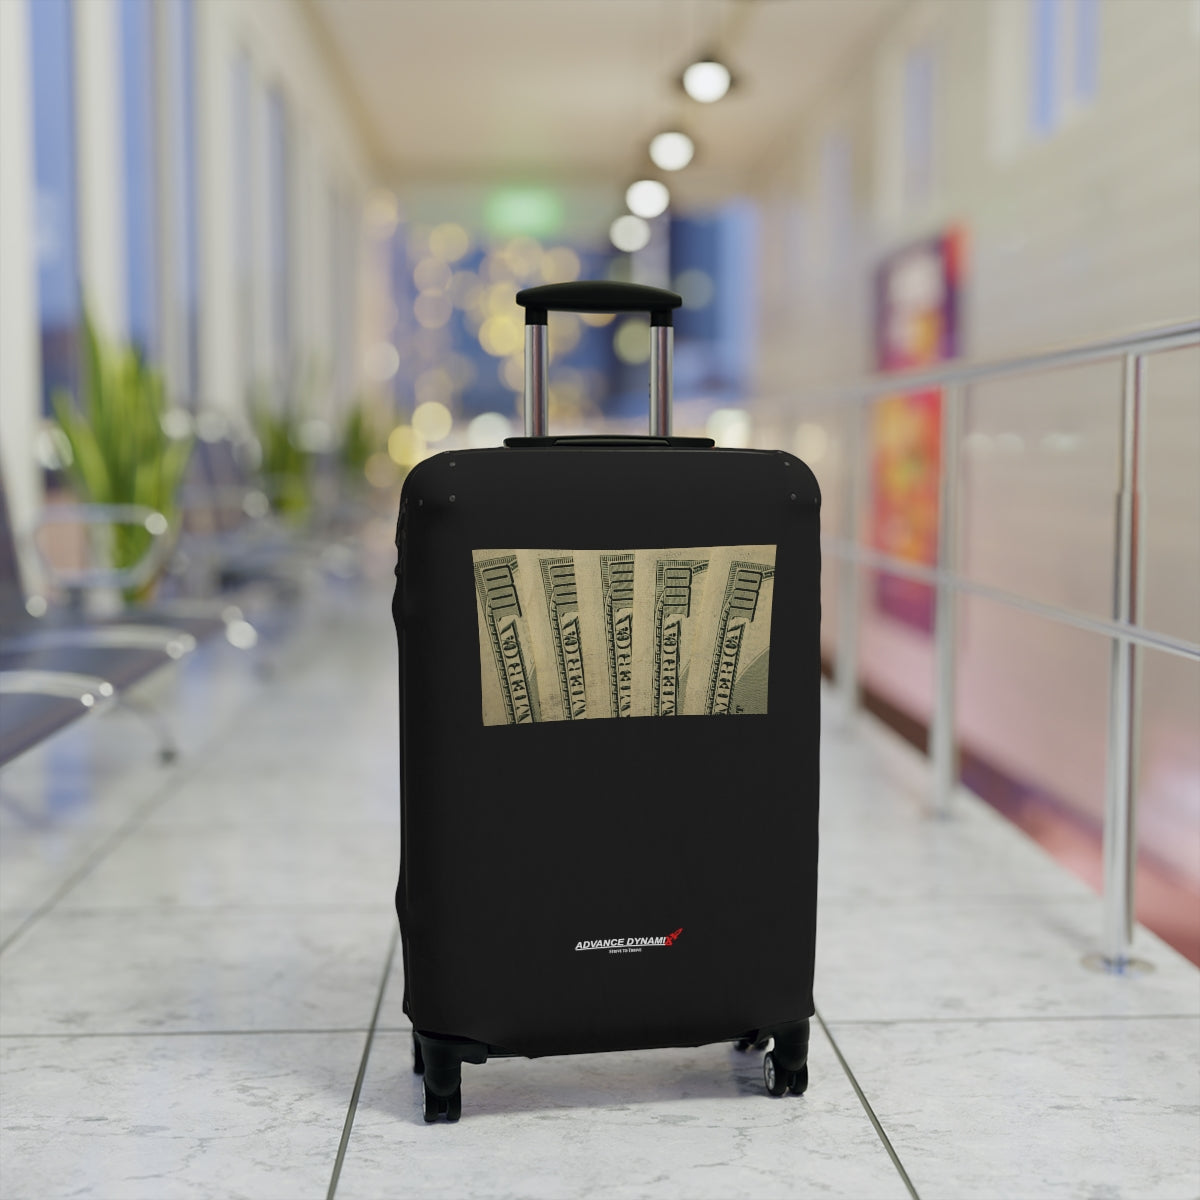 Benjamins - Luggage Covers Infused with Advance Dynamix Add-A-Tude - Tell the world!